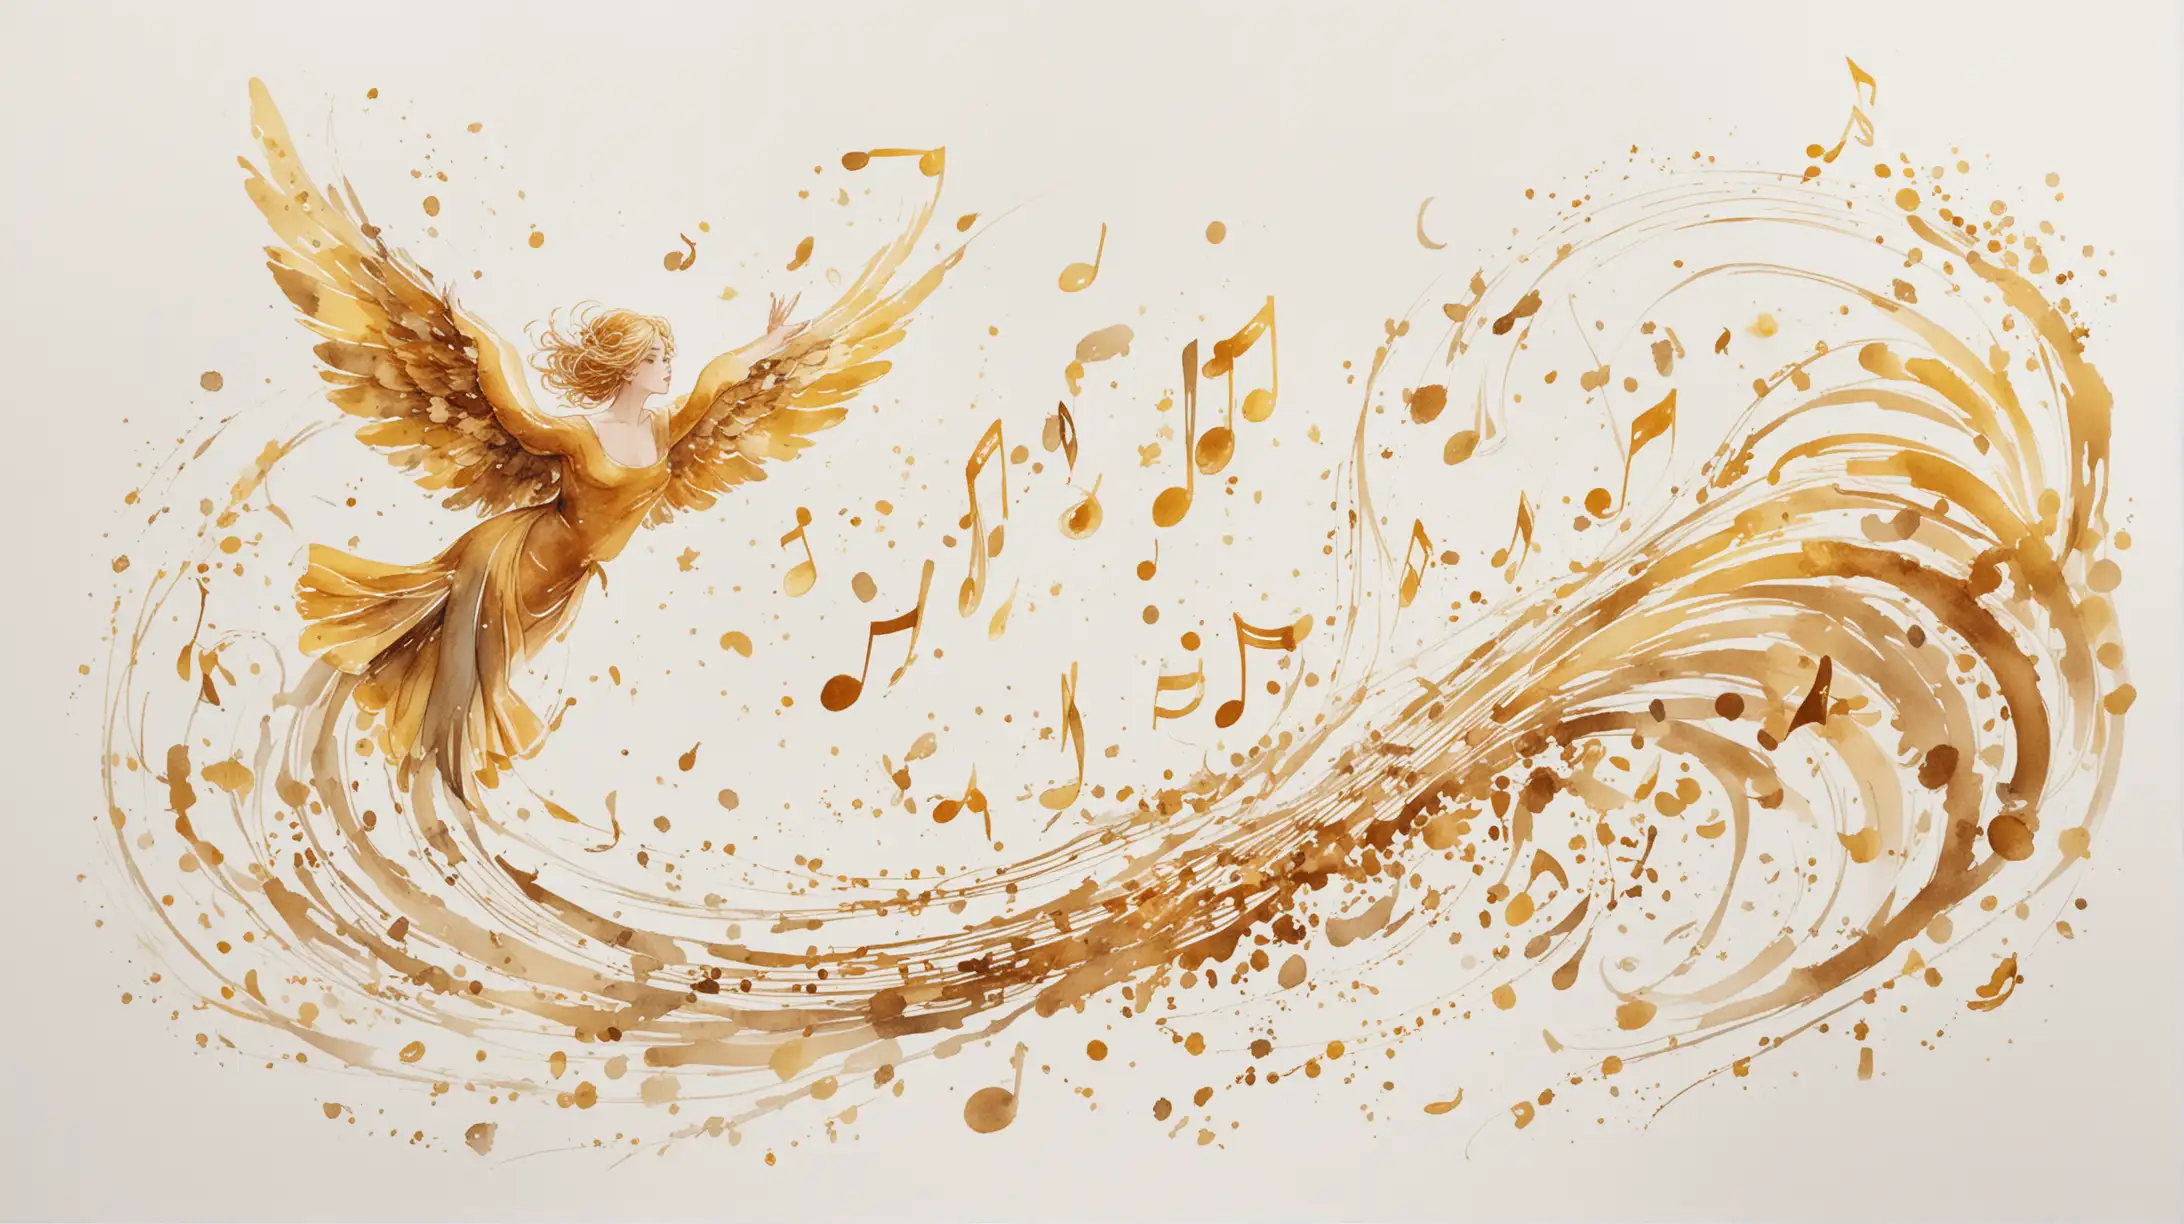 on a white background, painted in watercolor in anime style, a curling of flying golden notes, inspiration, flight, fantasy